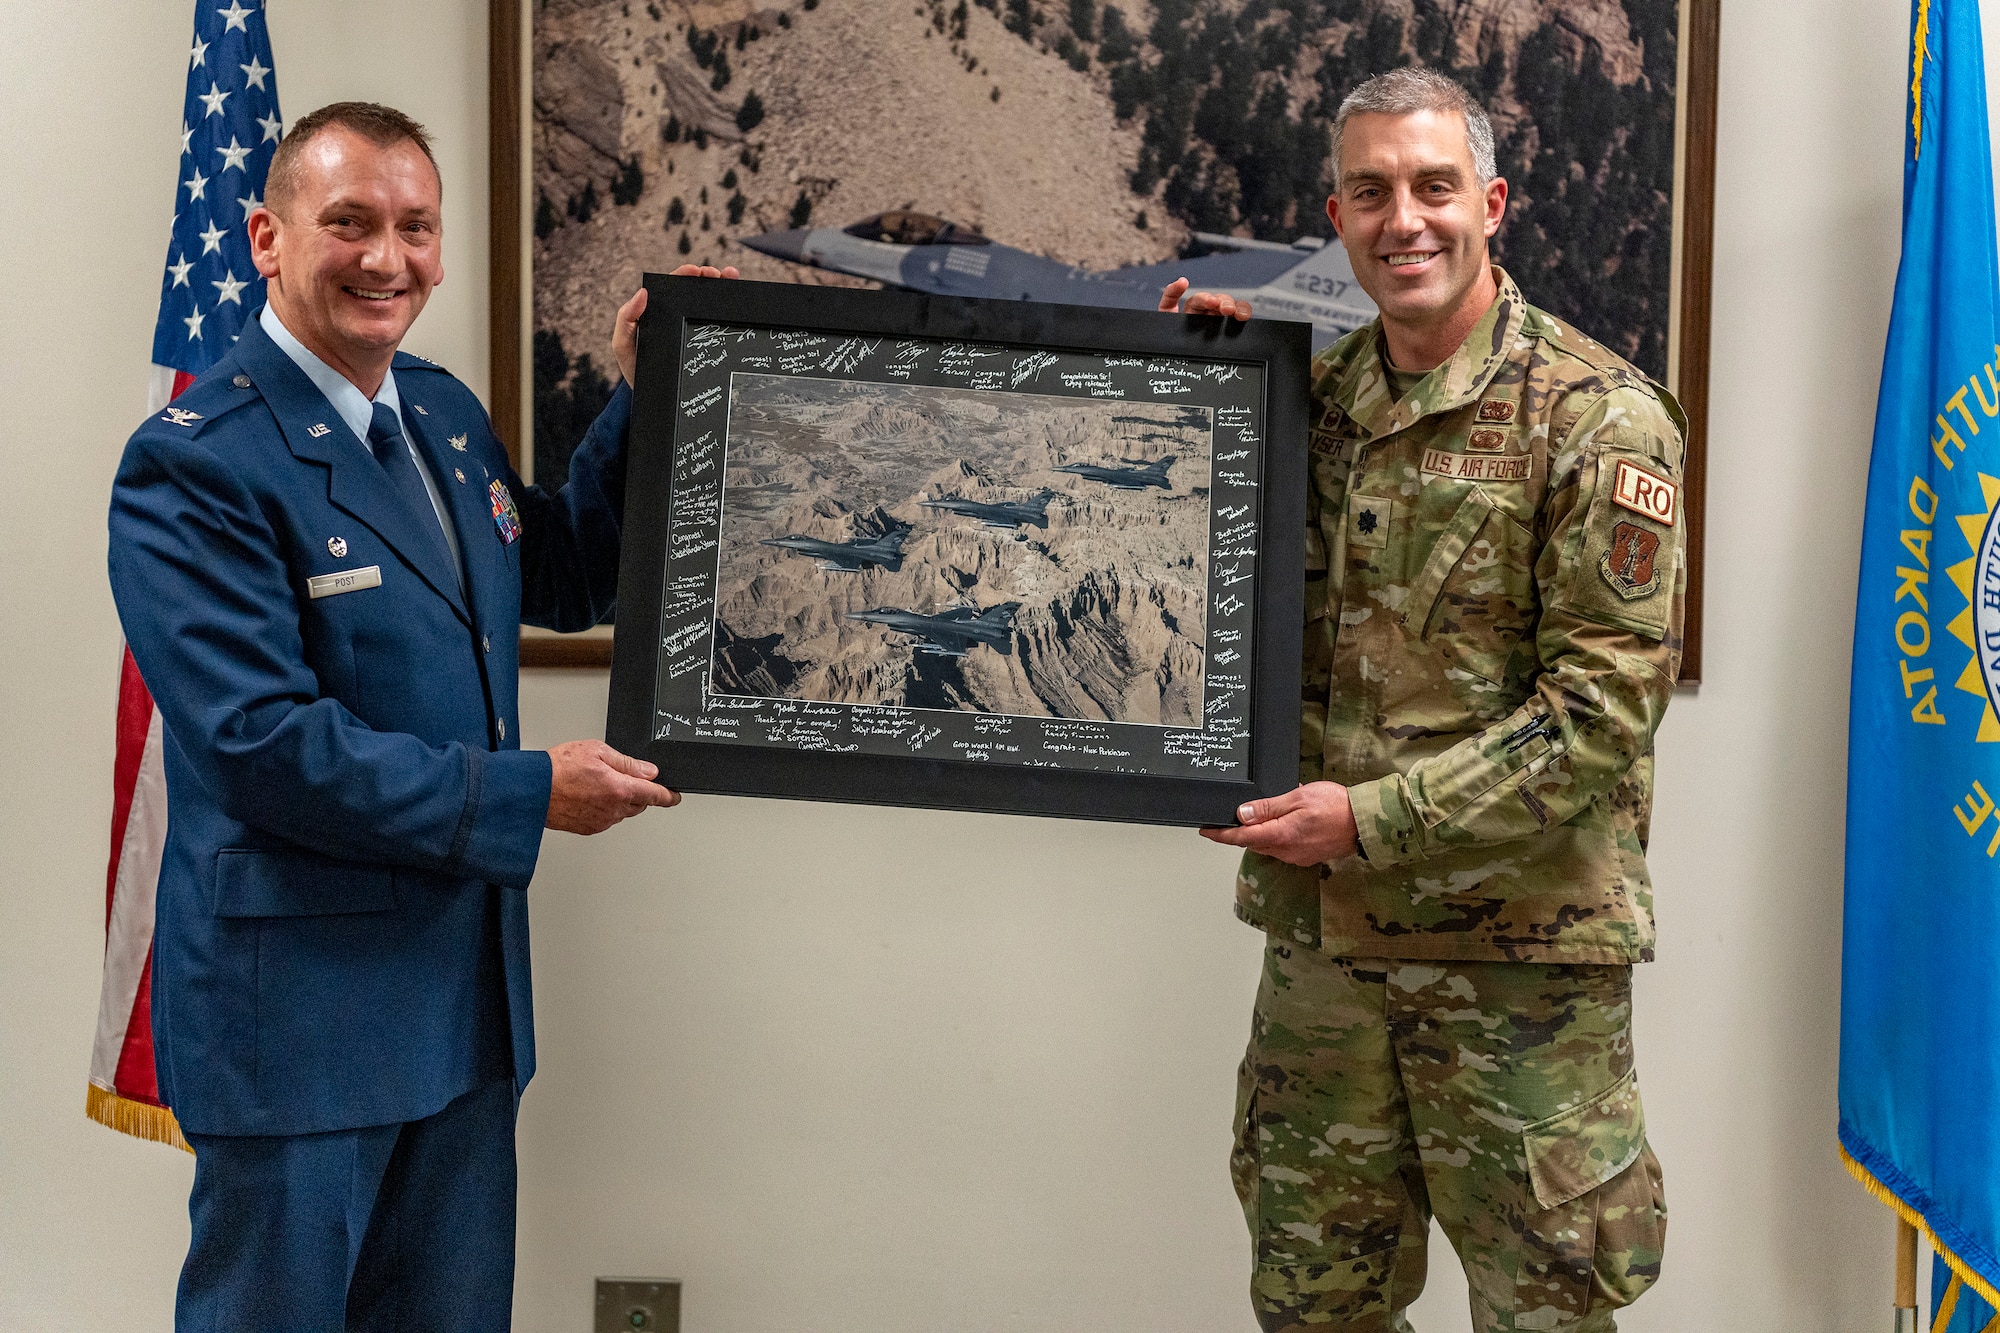 U.S. Air Force Lt. Col. Matthew Kayser, right, 114th Logistics Readiness commander, presents U.S. Air Force Col. Brent Post, retired, with a signed photo at Post’s retirement ceremony at Joe Foss Field, S.D., Dec. 3, 2023.